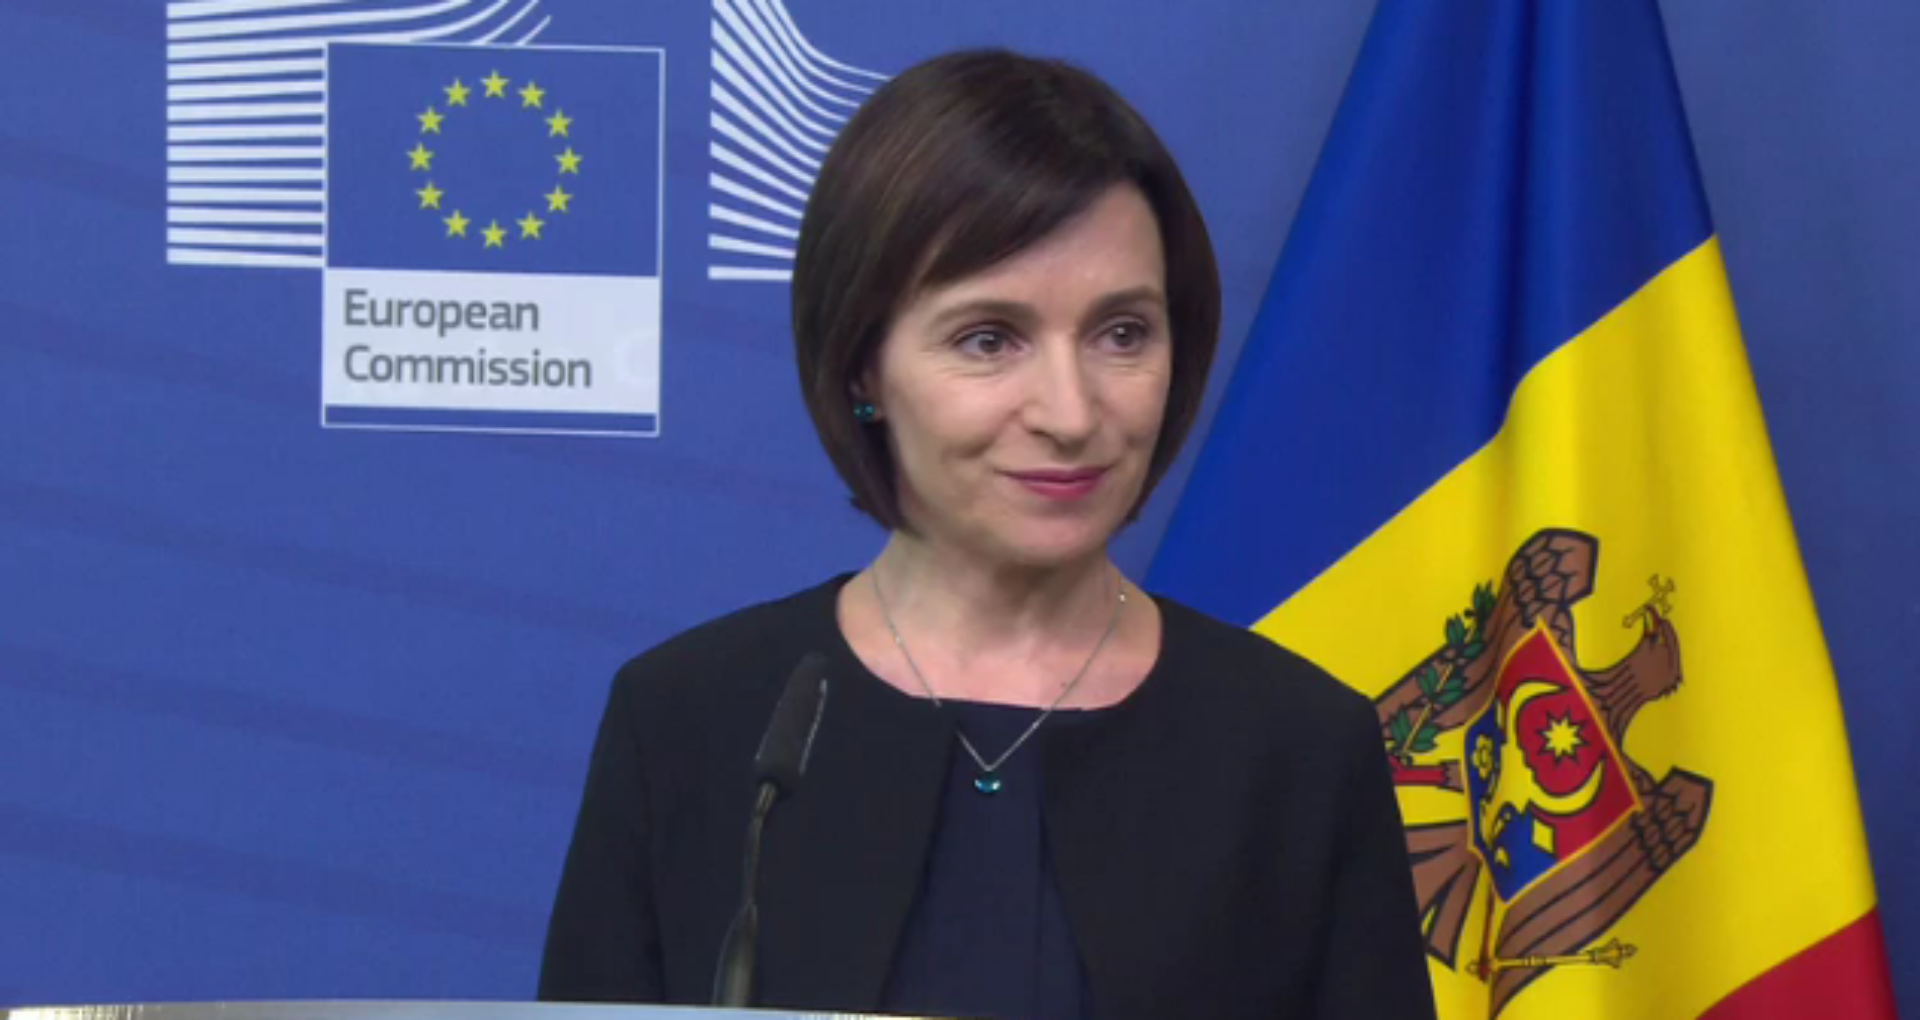 Prime Minister Maia Sandu visits Brussels: “One day we will be ready for the EU and we will knock at the door with confidence”